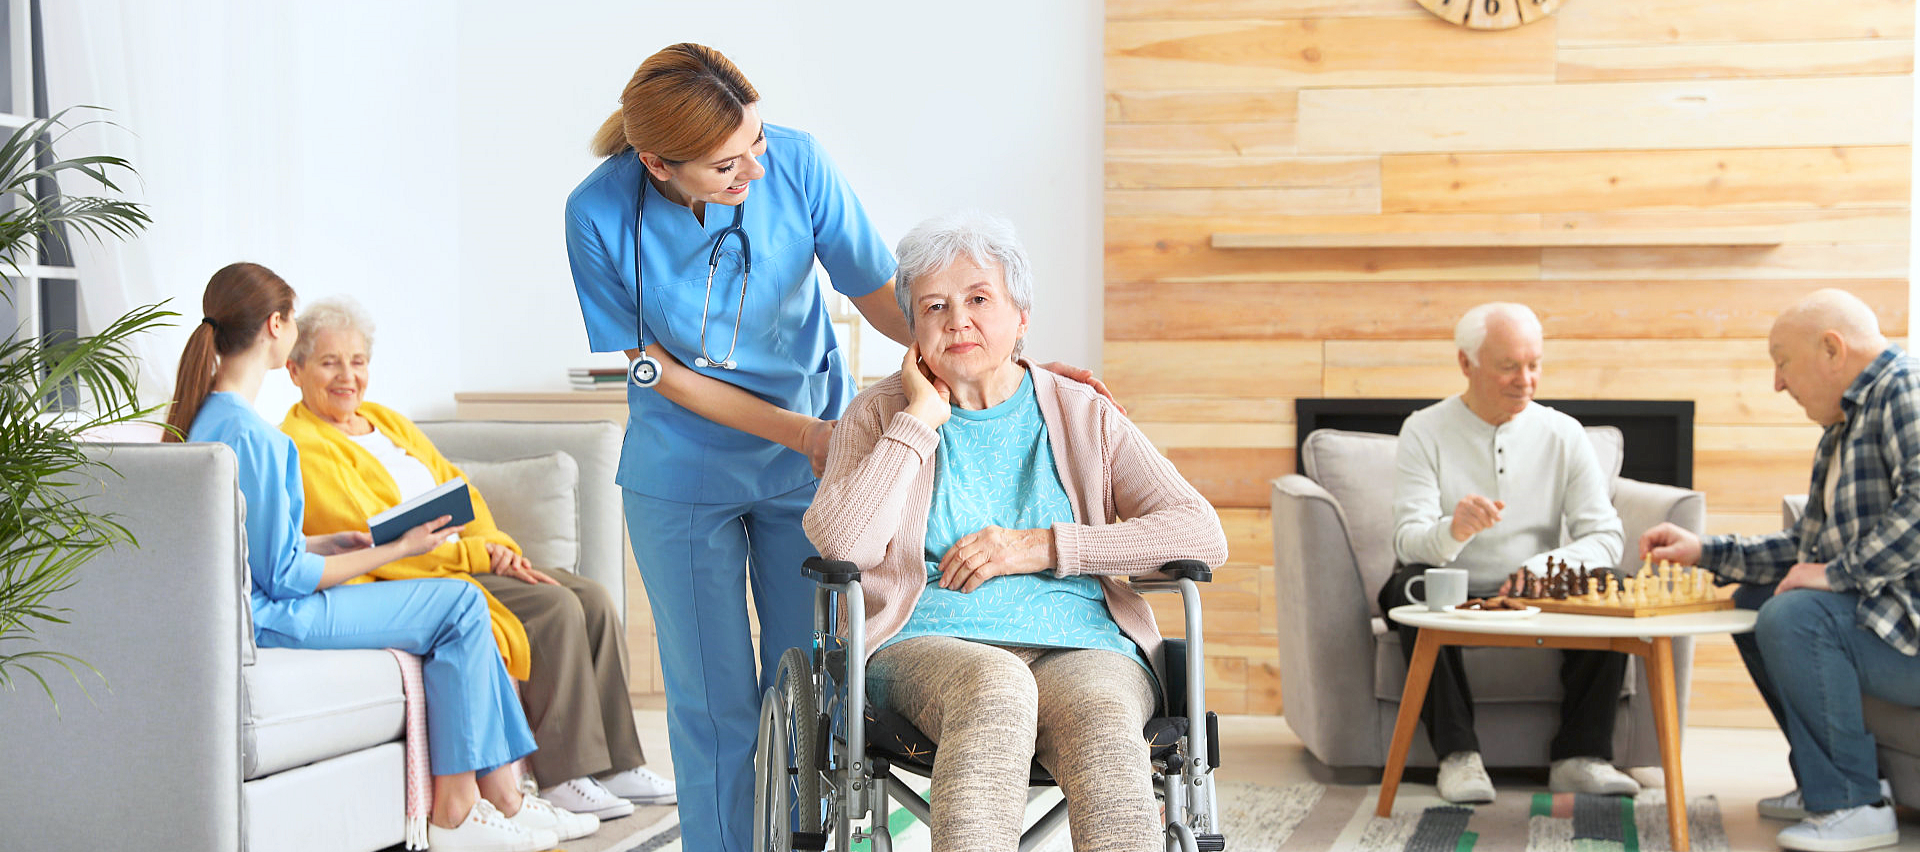 physical therapist assisting patient on a wheelchair